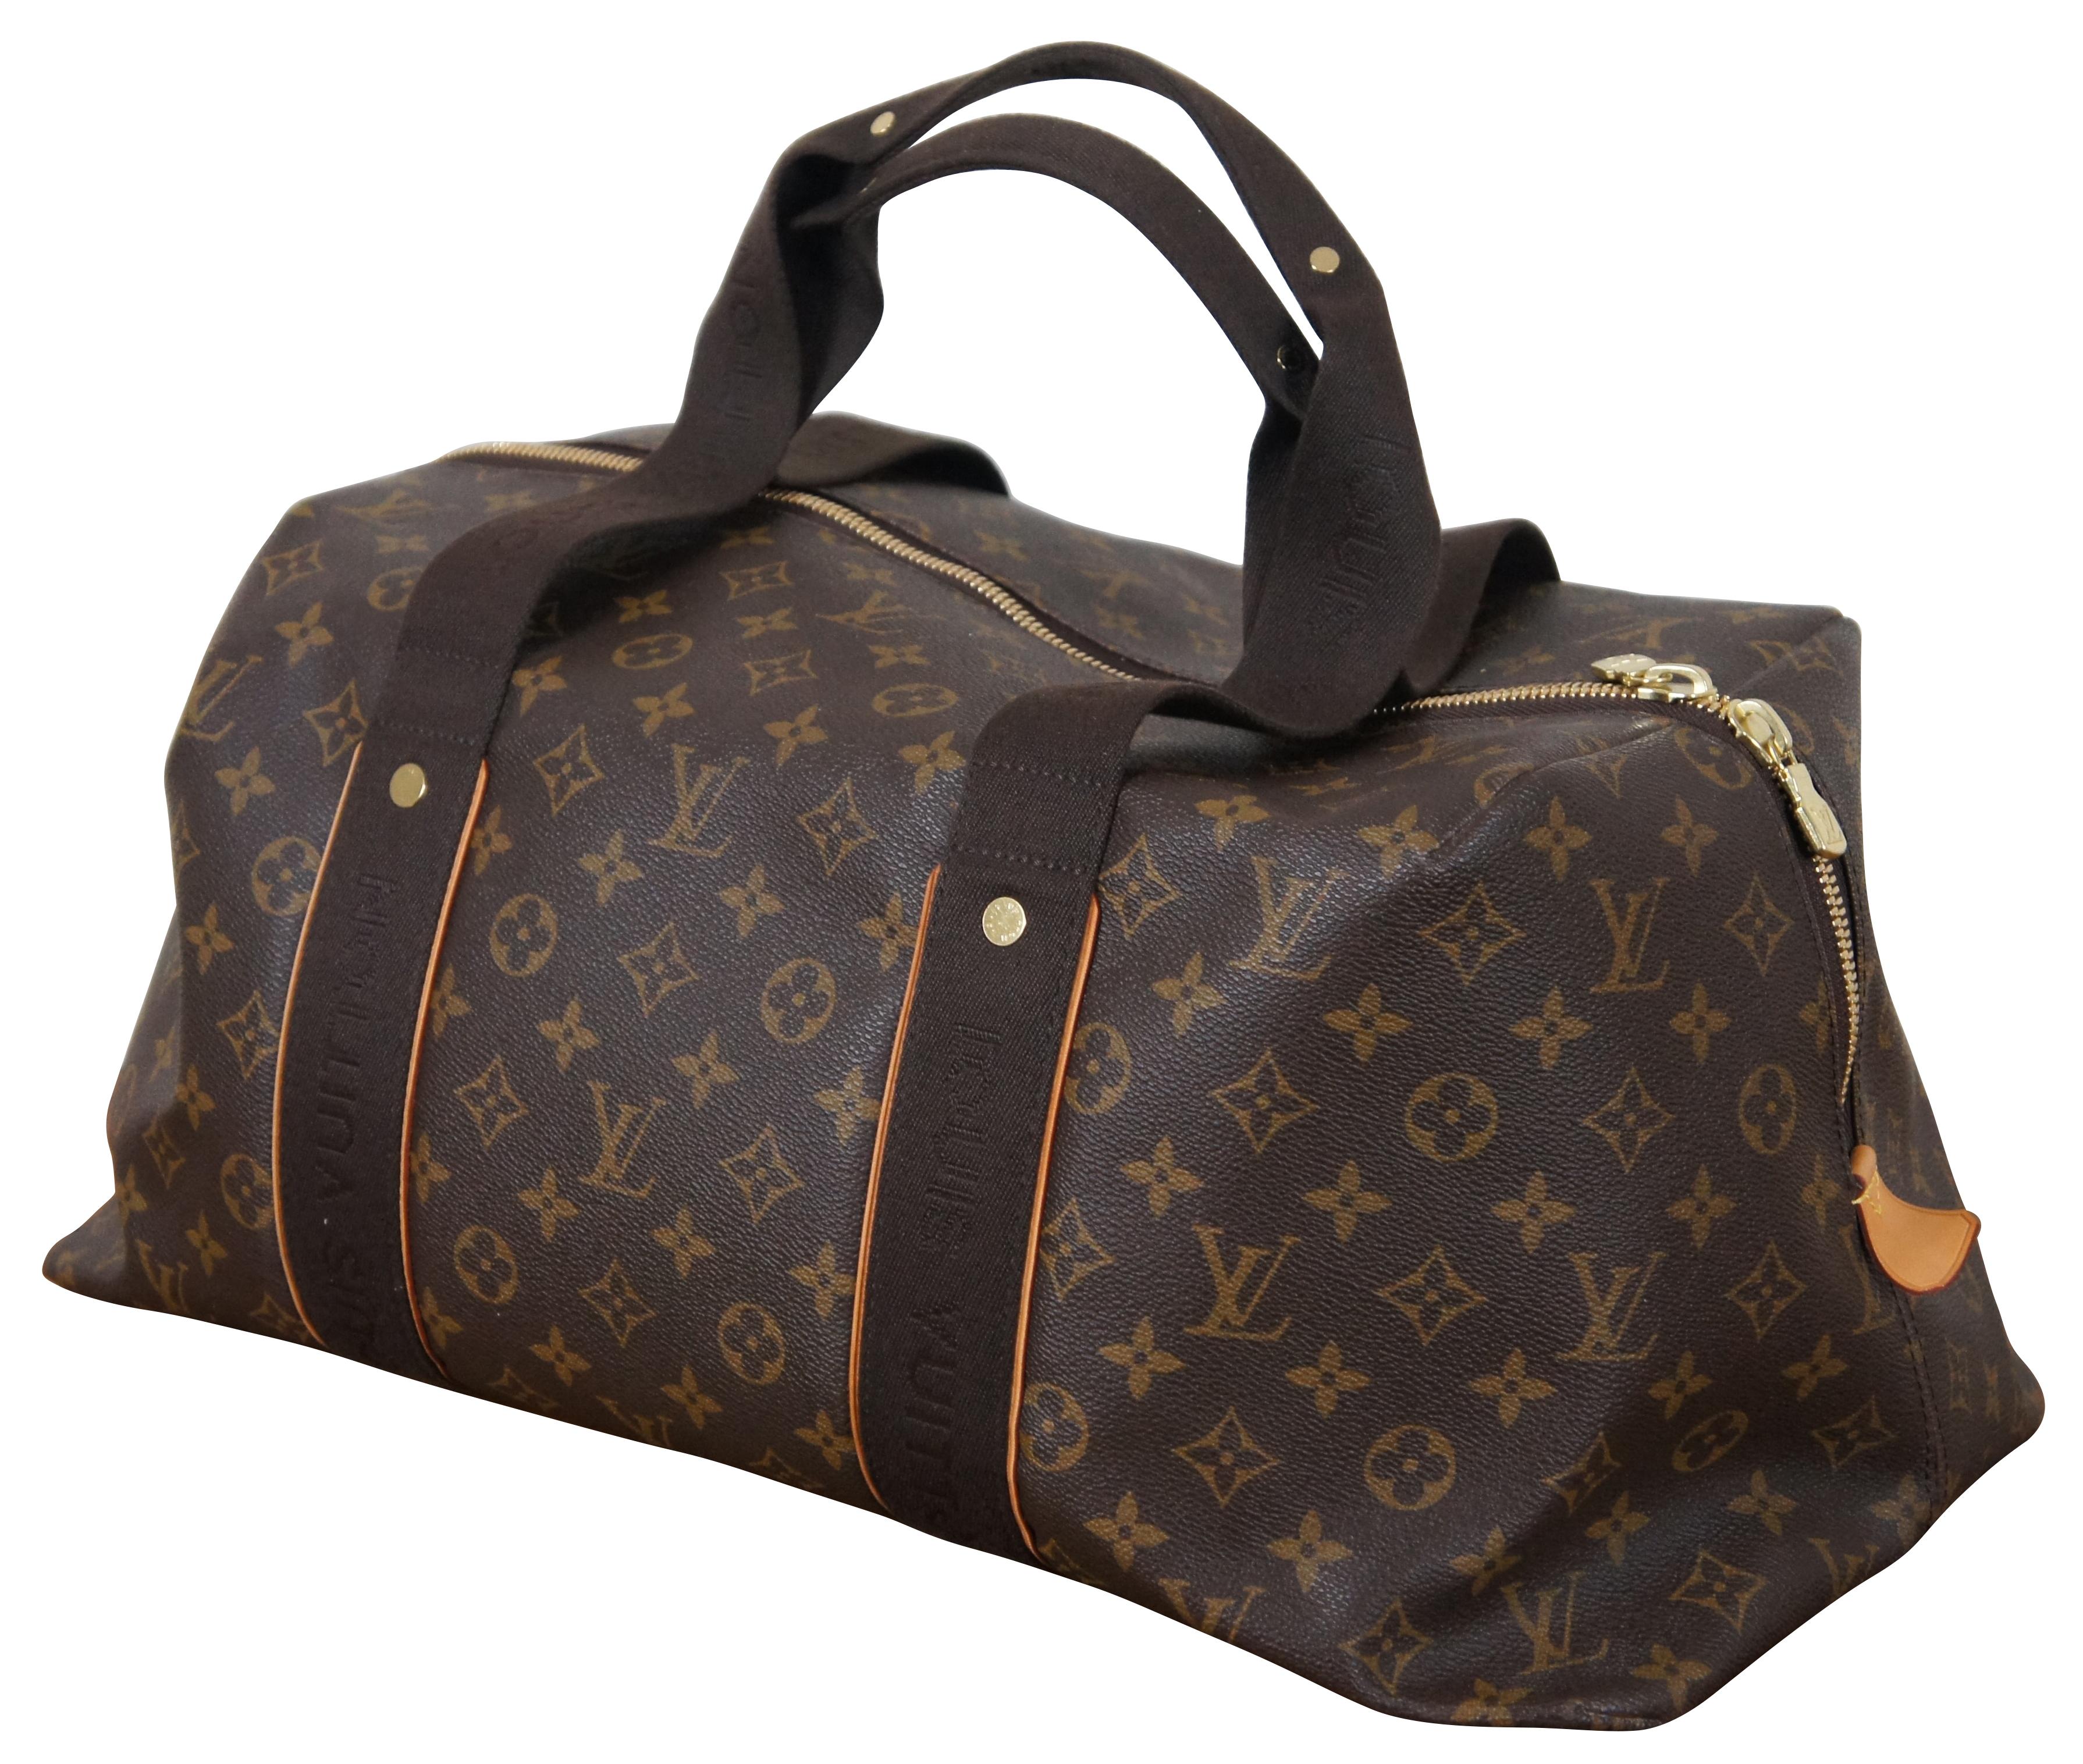 Vintage Louis Vuitton Beaubourg Weekender duffle bag crafted from brown monogram canvas with cowhide leather trim, canvas straps, and gold tone brass hardware. One slip pocket on front and six interior organizational pockets. Serial Number DU2161. 